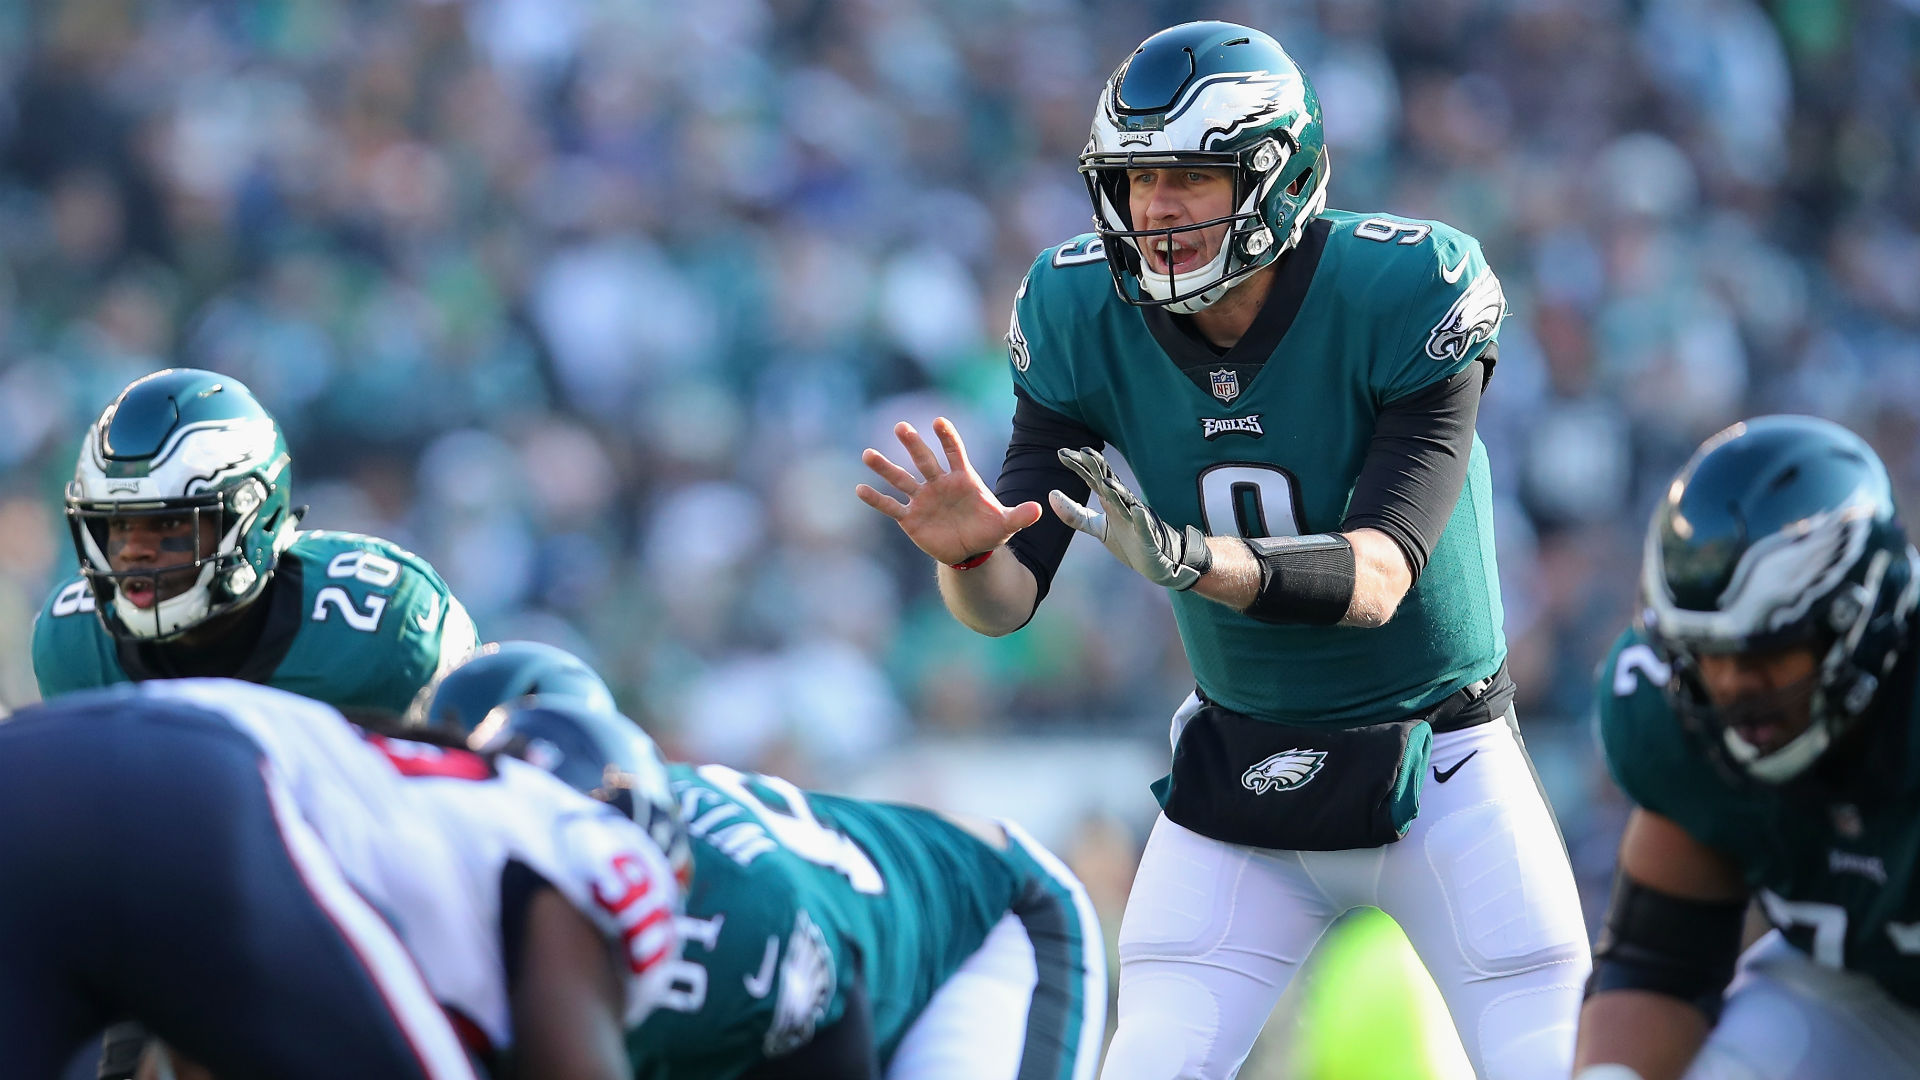 Report: Nick Foles won't be back with Eagles next year | Sporting News